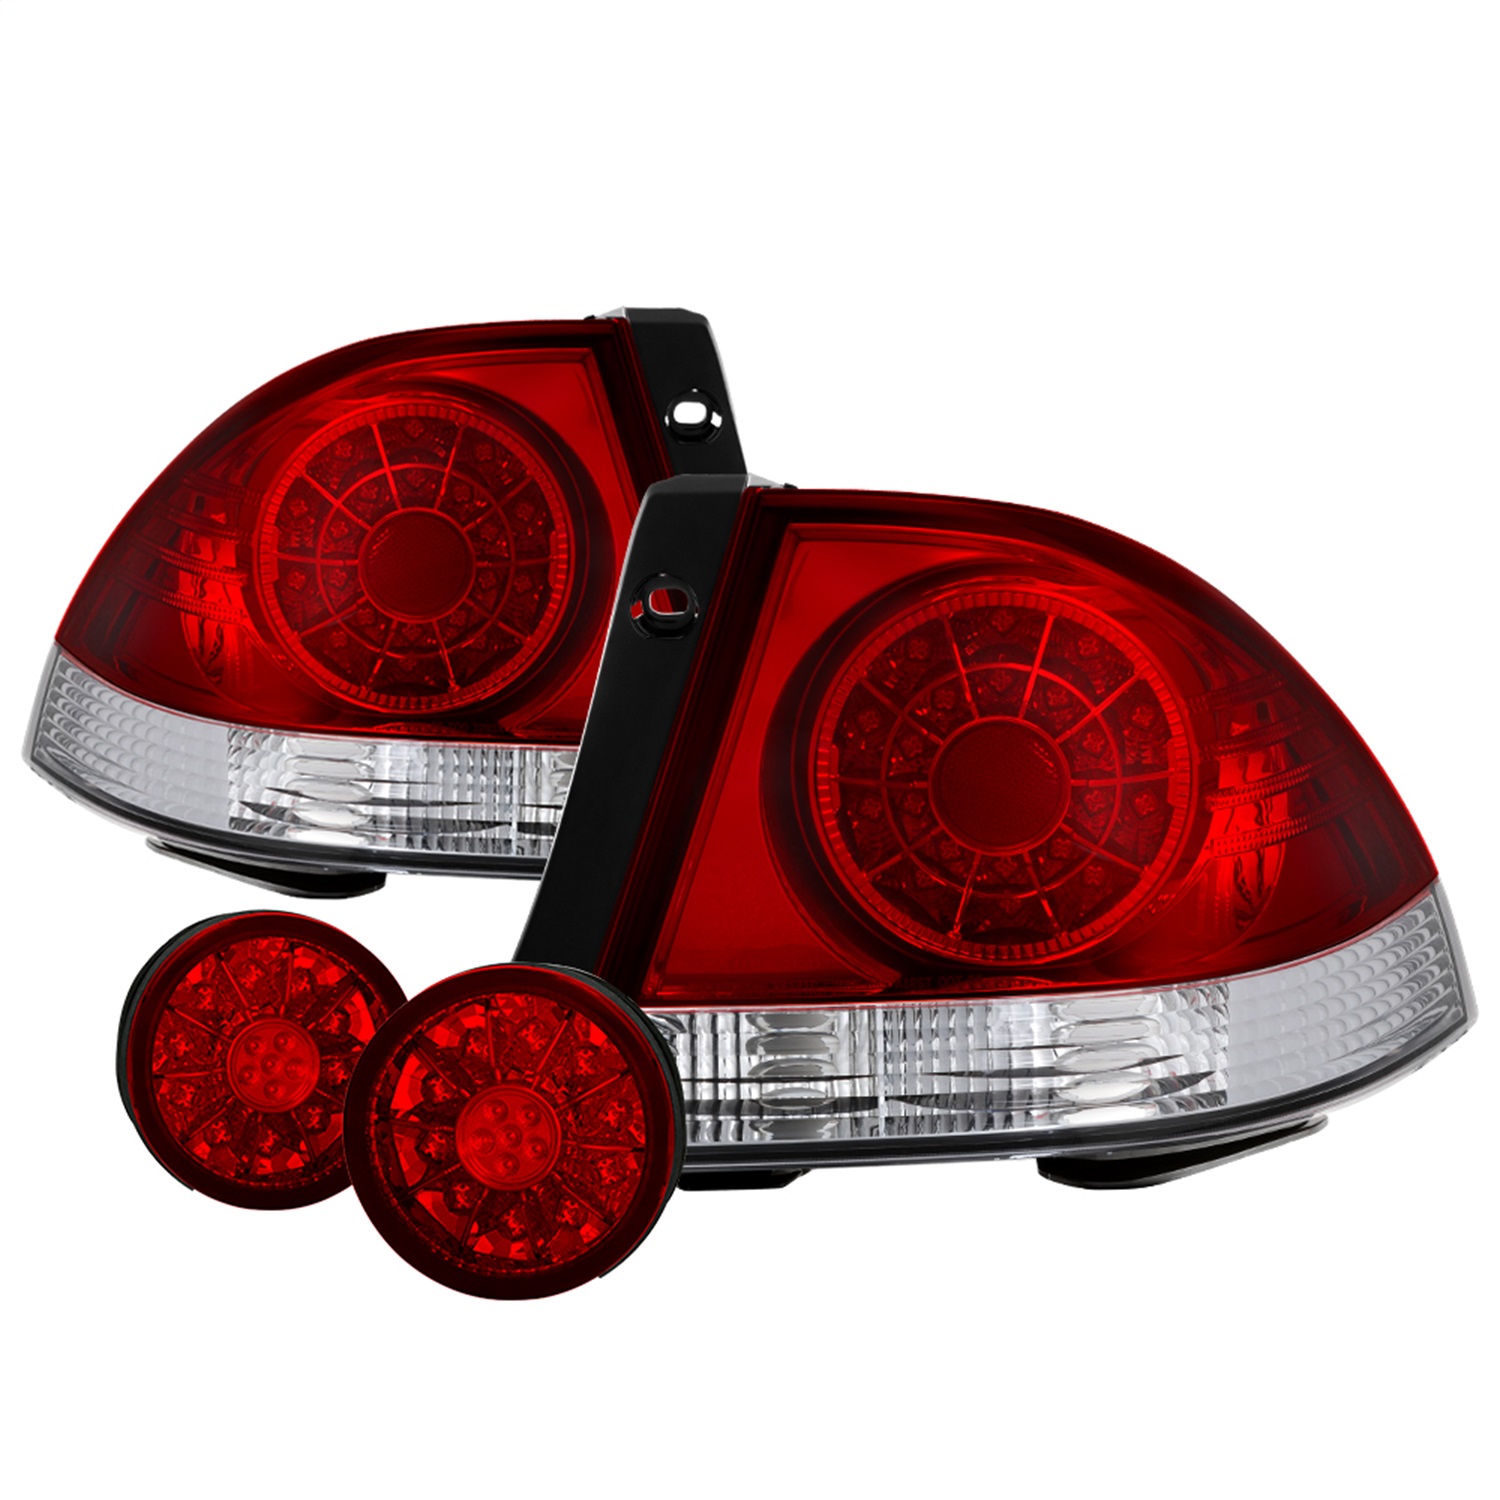 Spyder Auto 5085061 LED Tail Lights Fits 01-03 IS300